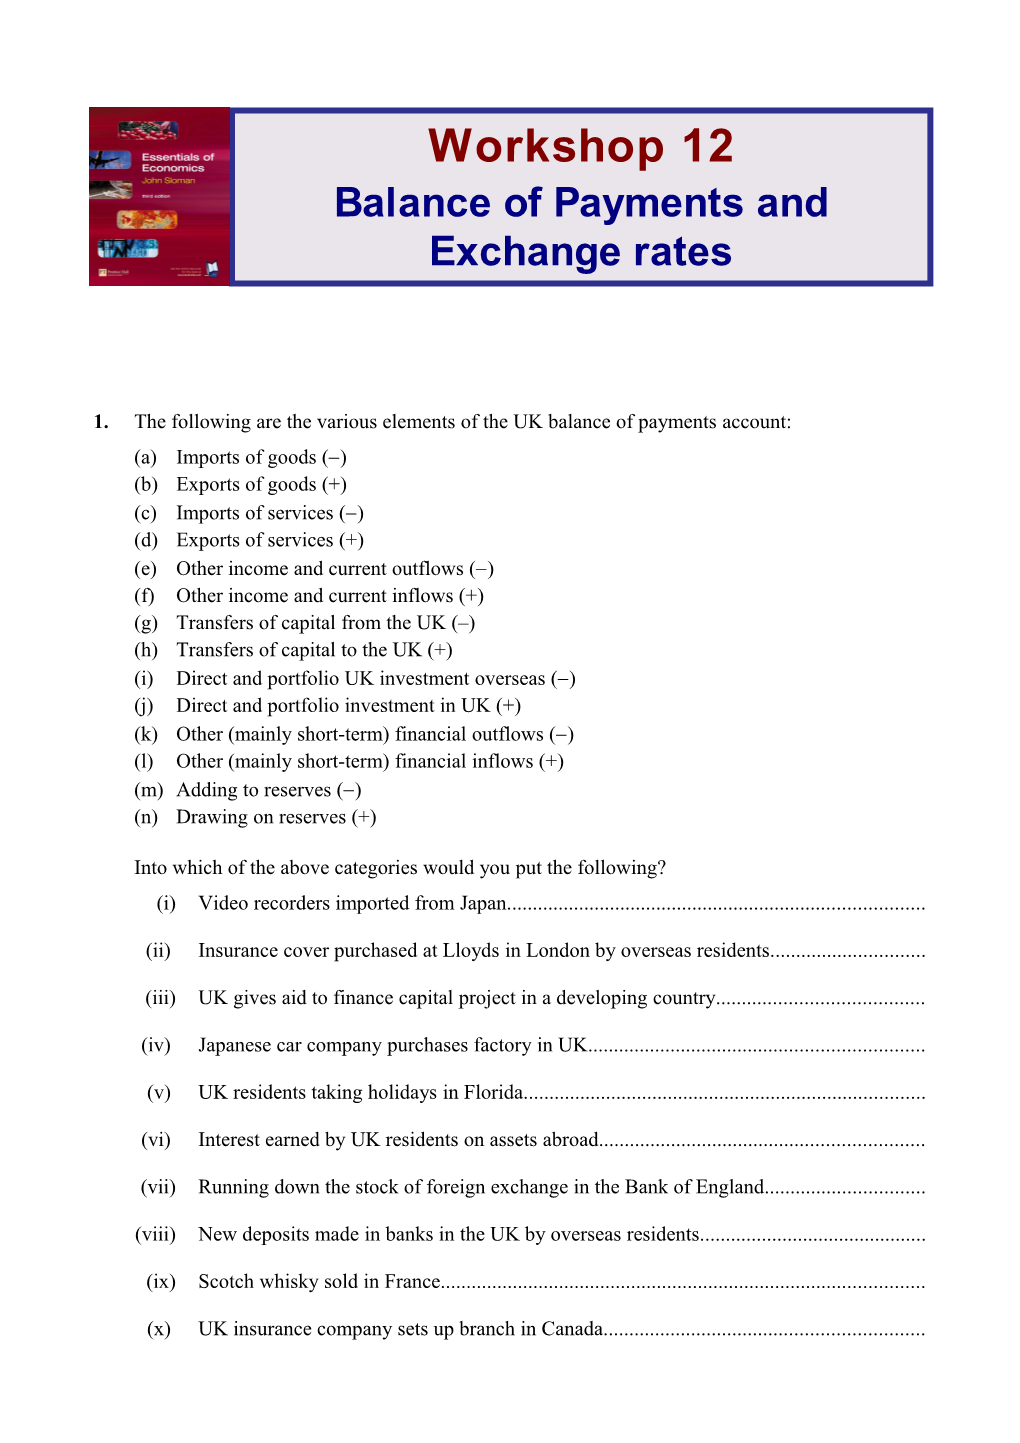 1. the Following Are the Various Elements of the UK Balance of Payments Account